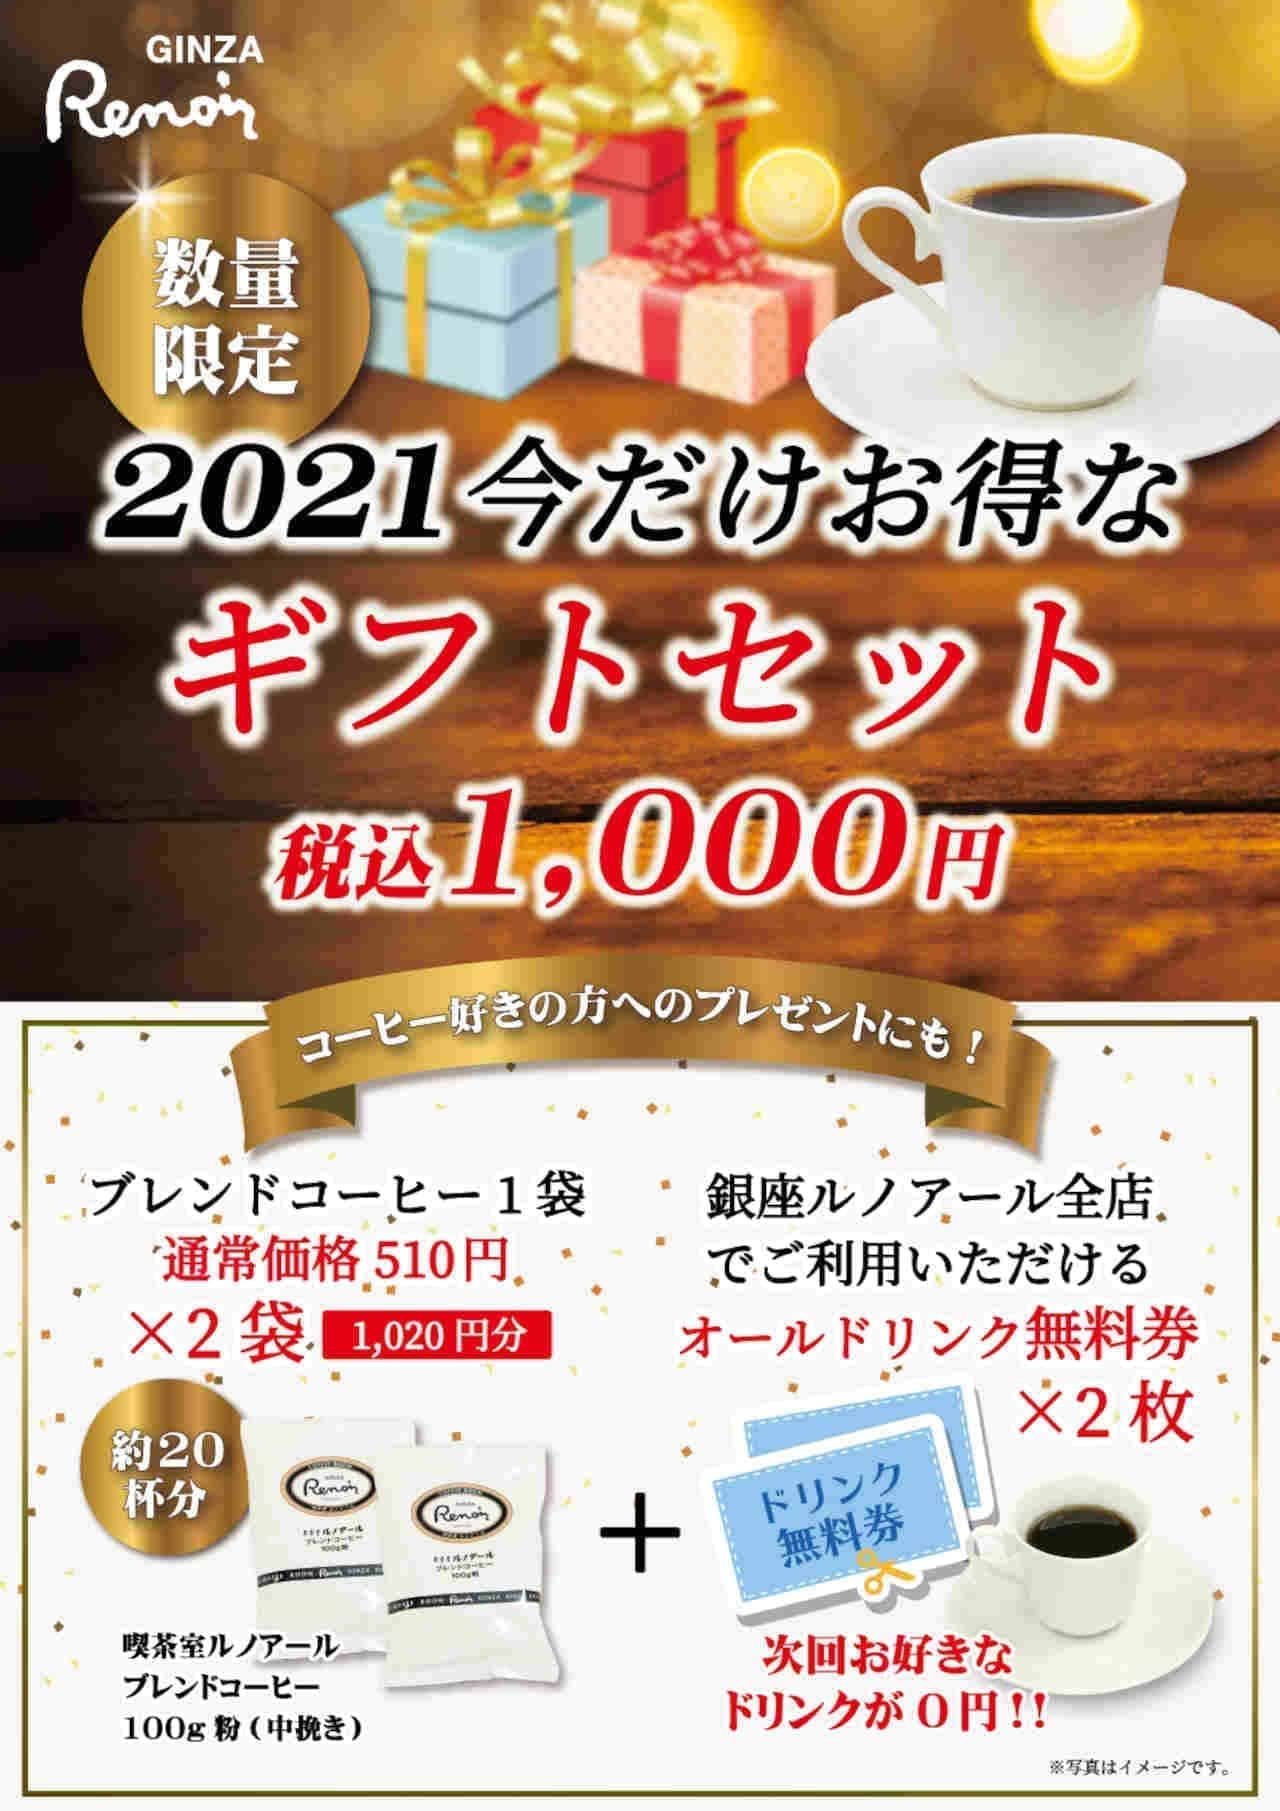 Ginza Renoir's "2021 Great Gift Set for Now"